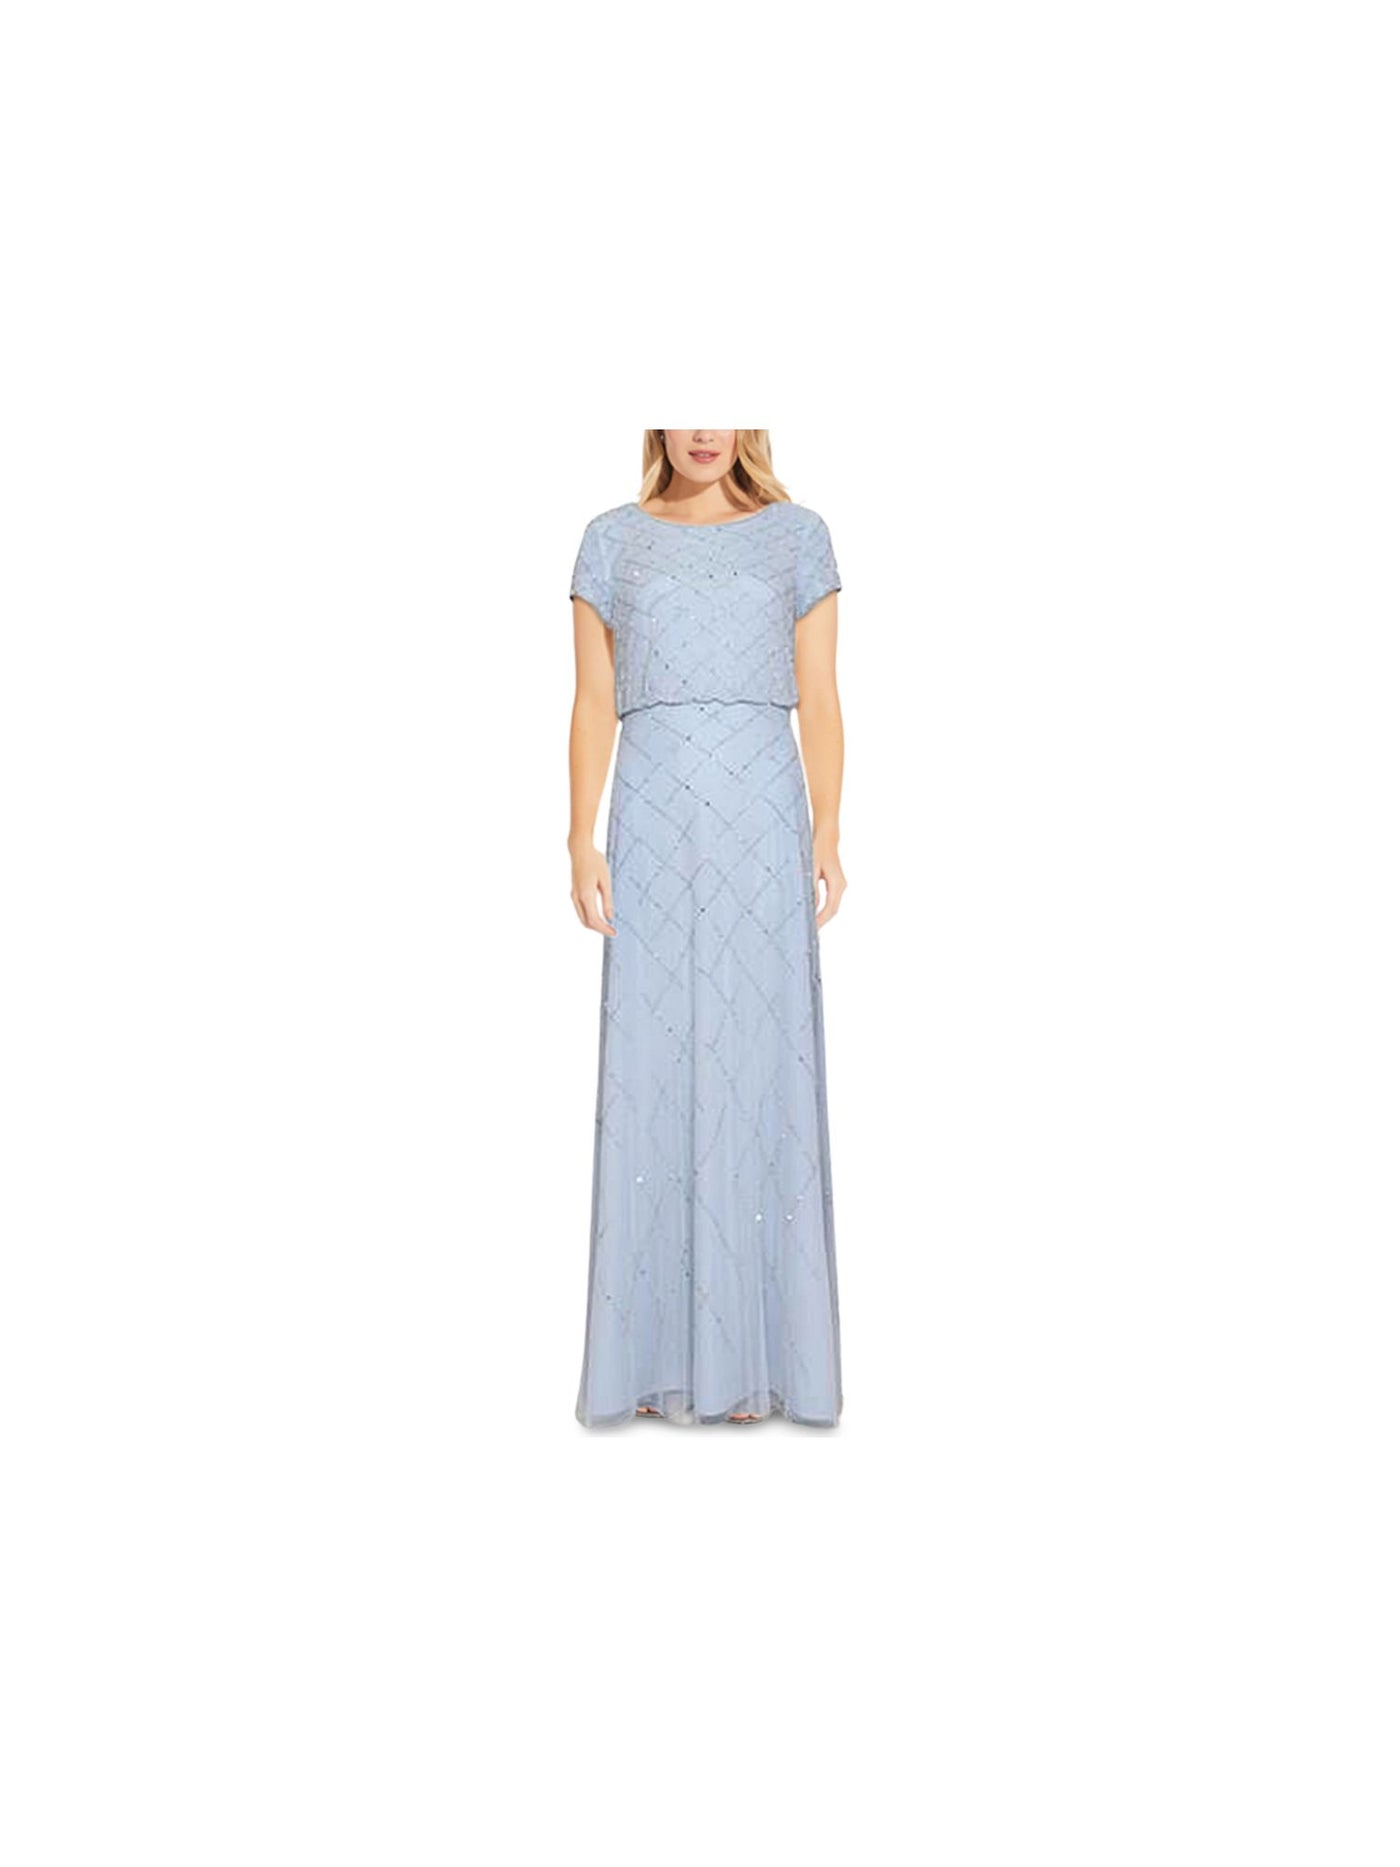 ADRIANNA PAPELL Womens Light Blue Beaded Sequined Zippered Short Sleeve Scoop Neck Full-Length Party Gown Dress 6